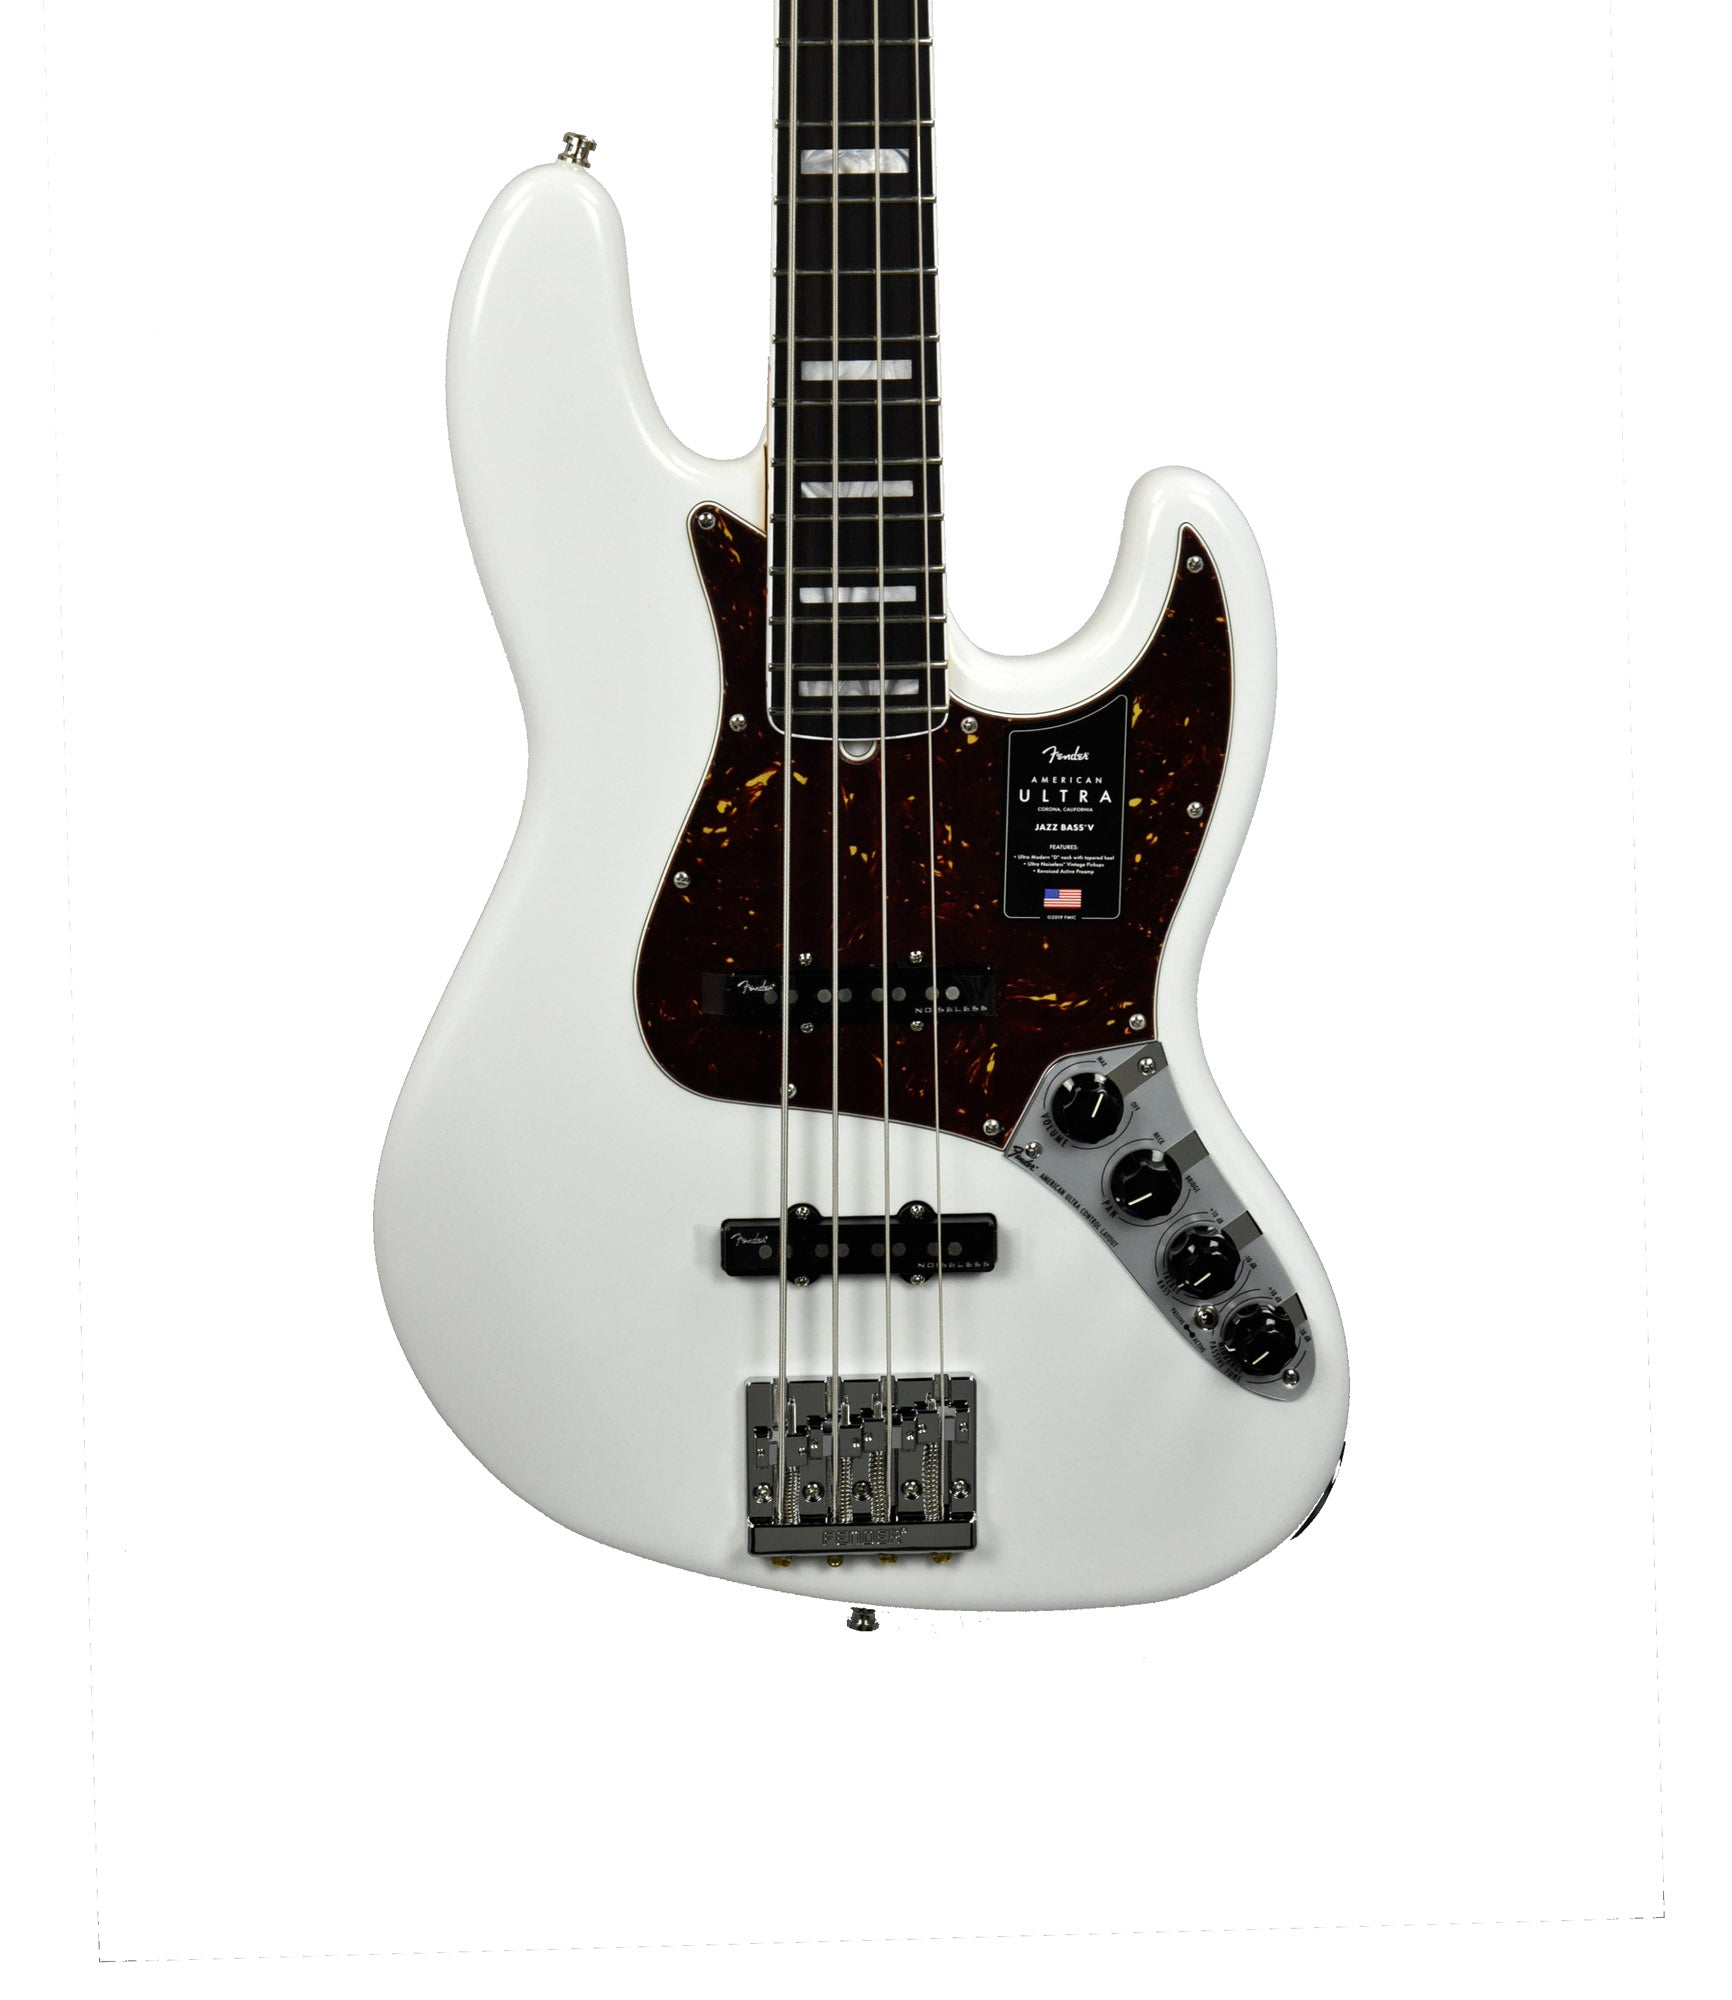 US22042426　Arctic　Bass　Ultra　Pearl　in　Jazz　Gallery　Fender　Music　American　The